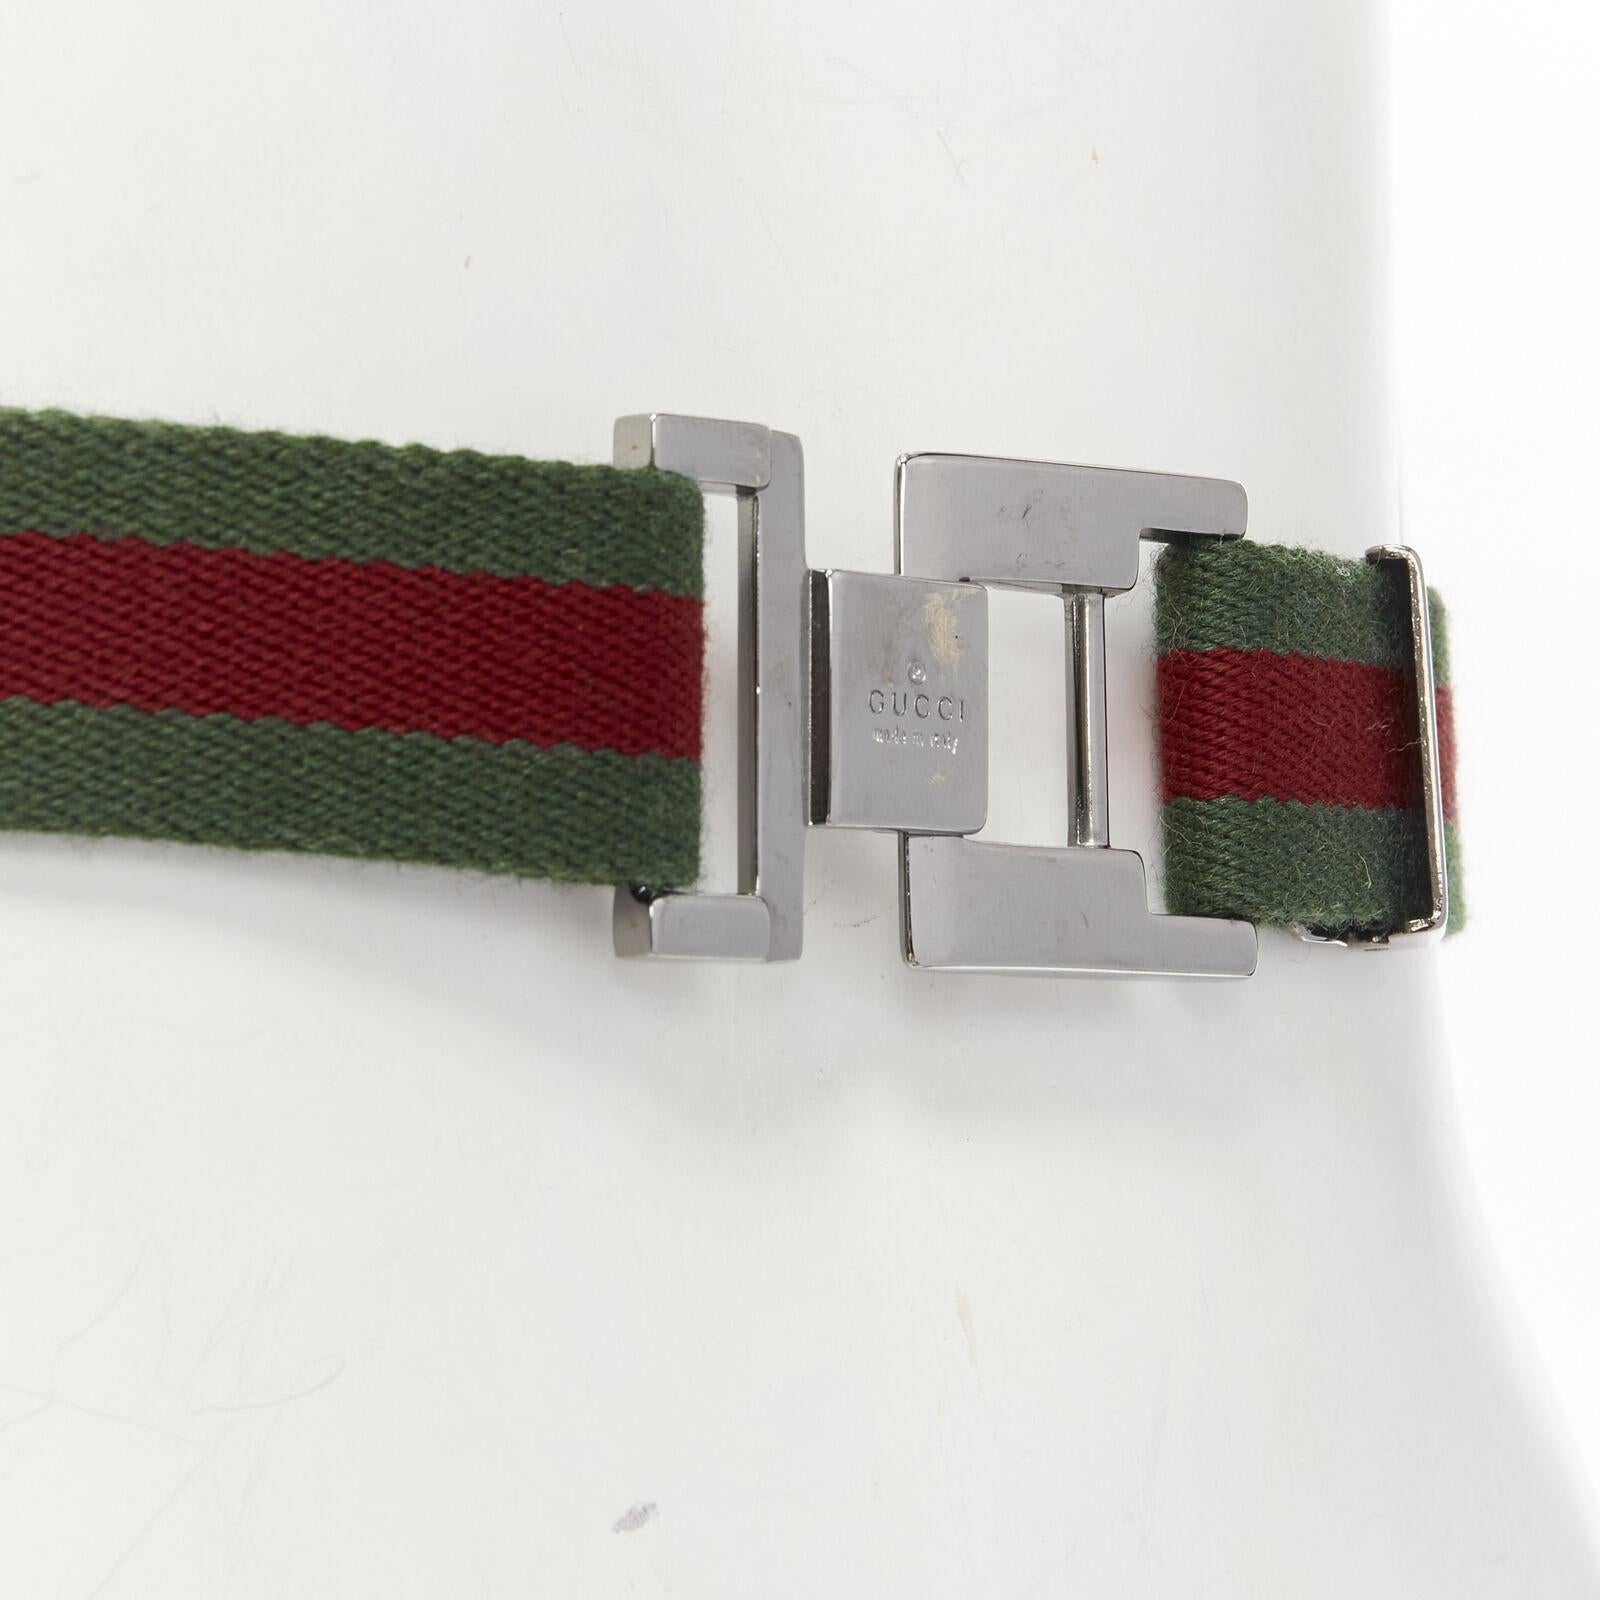 GUCCI Vintage Y2K silver ruthenium GG square buckle red green web belt
Reference: ANWU/A00868
Brand: Gucci
Color: Green, Red
Pattern: Solid
Closure: Buckle
Made in: Italy

CONDITION:
Condition: Fair, this item was pre-owned and is in fair condition.